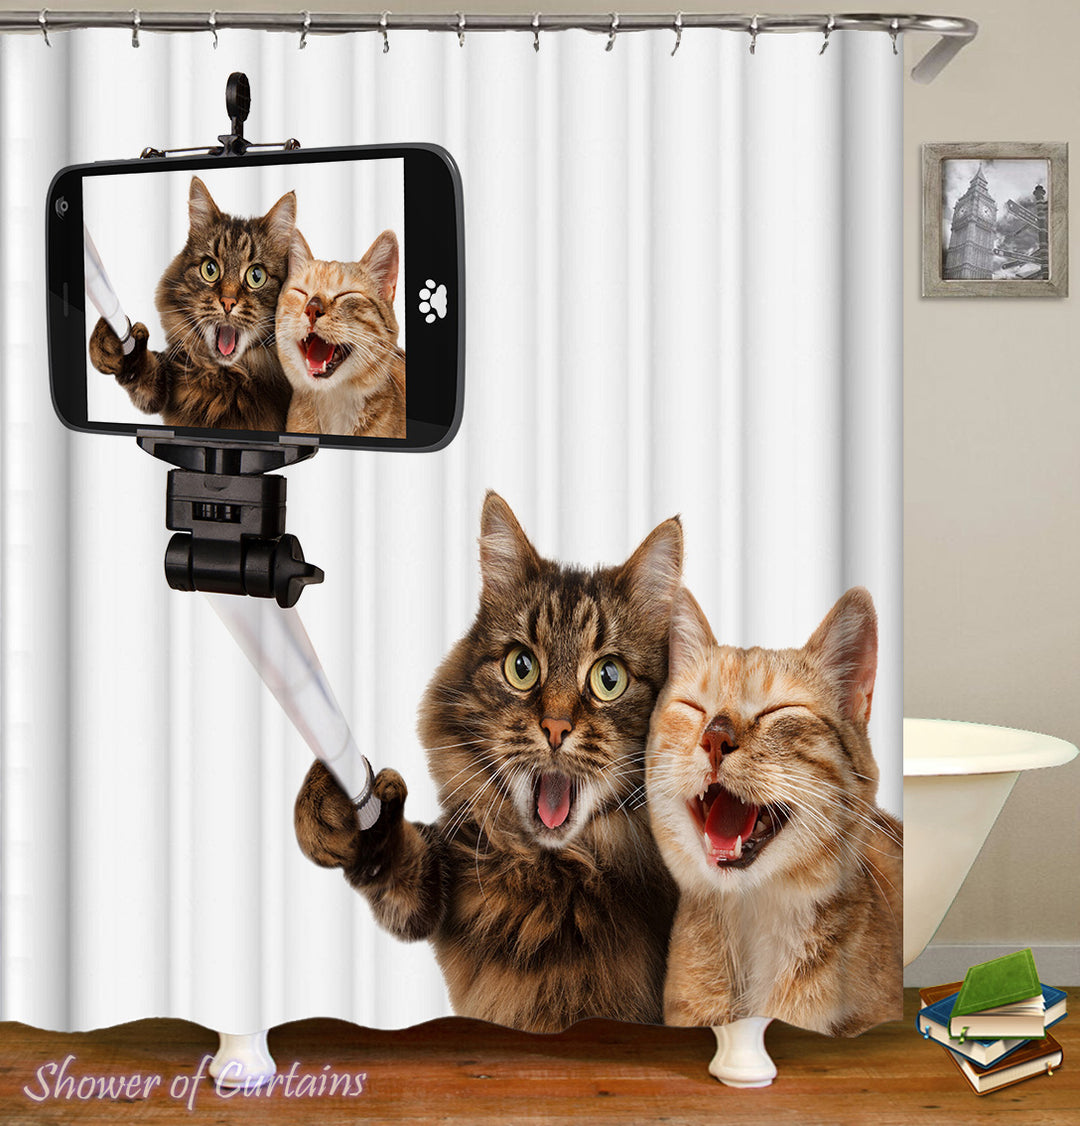 Funny Shower Curtains - Cats Taking A Selfie